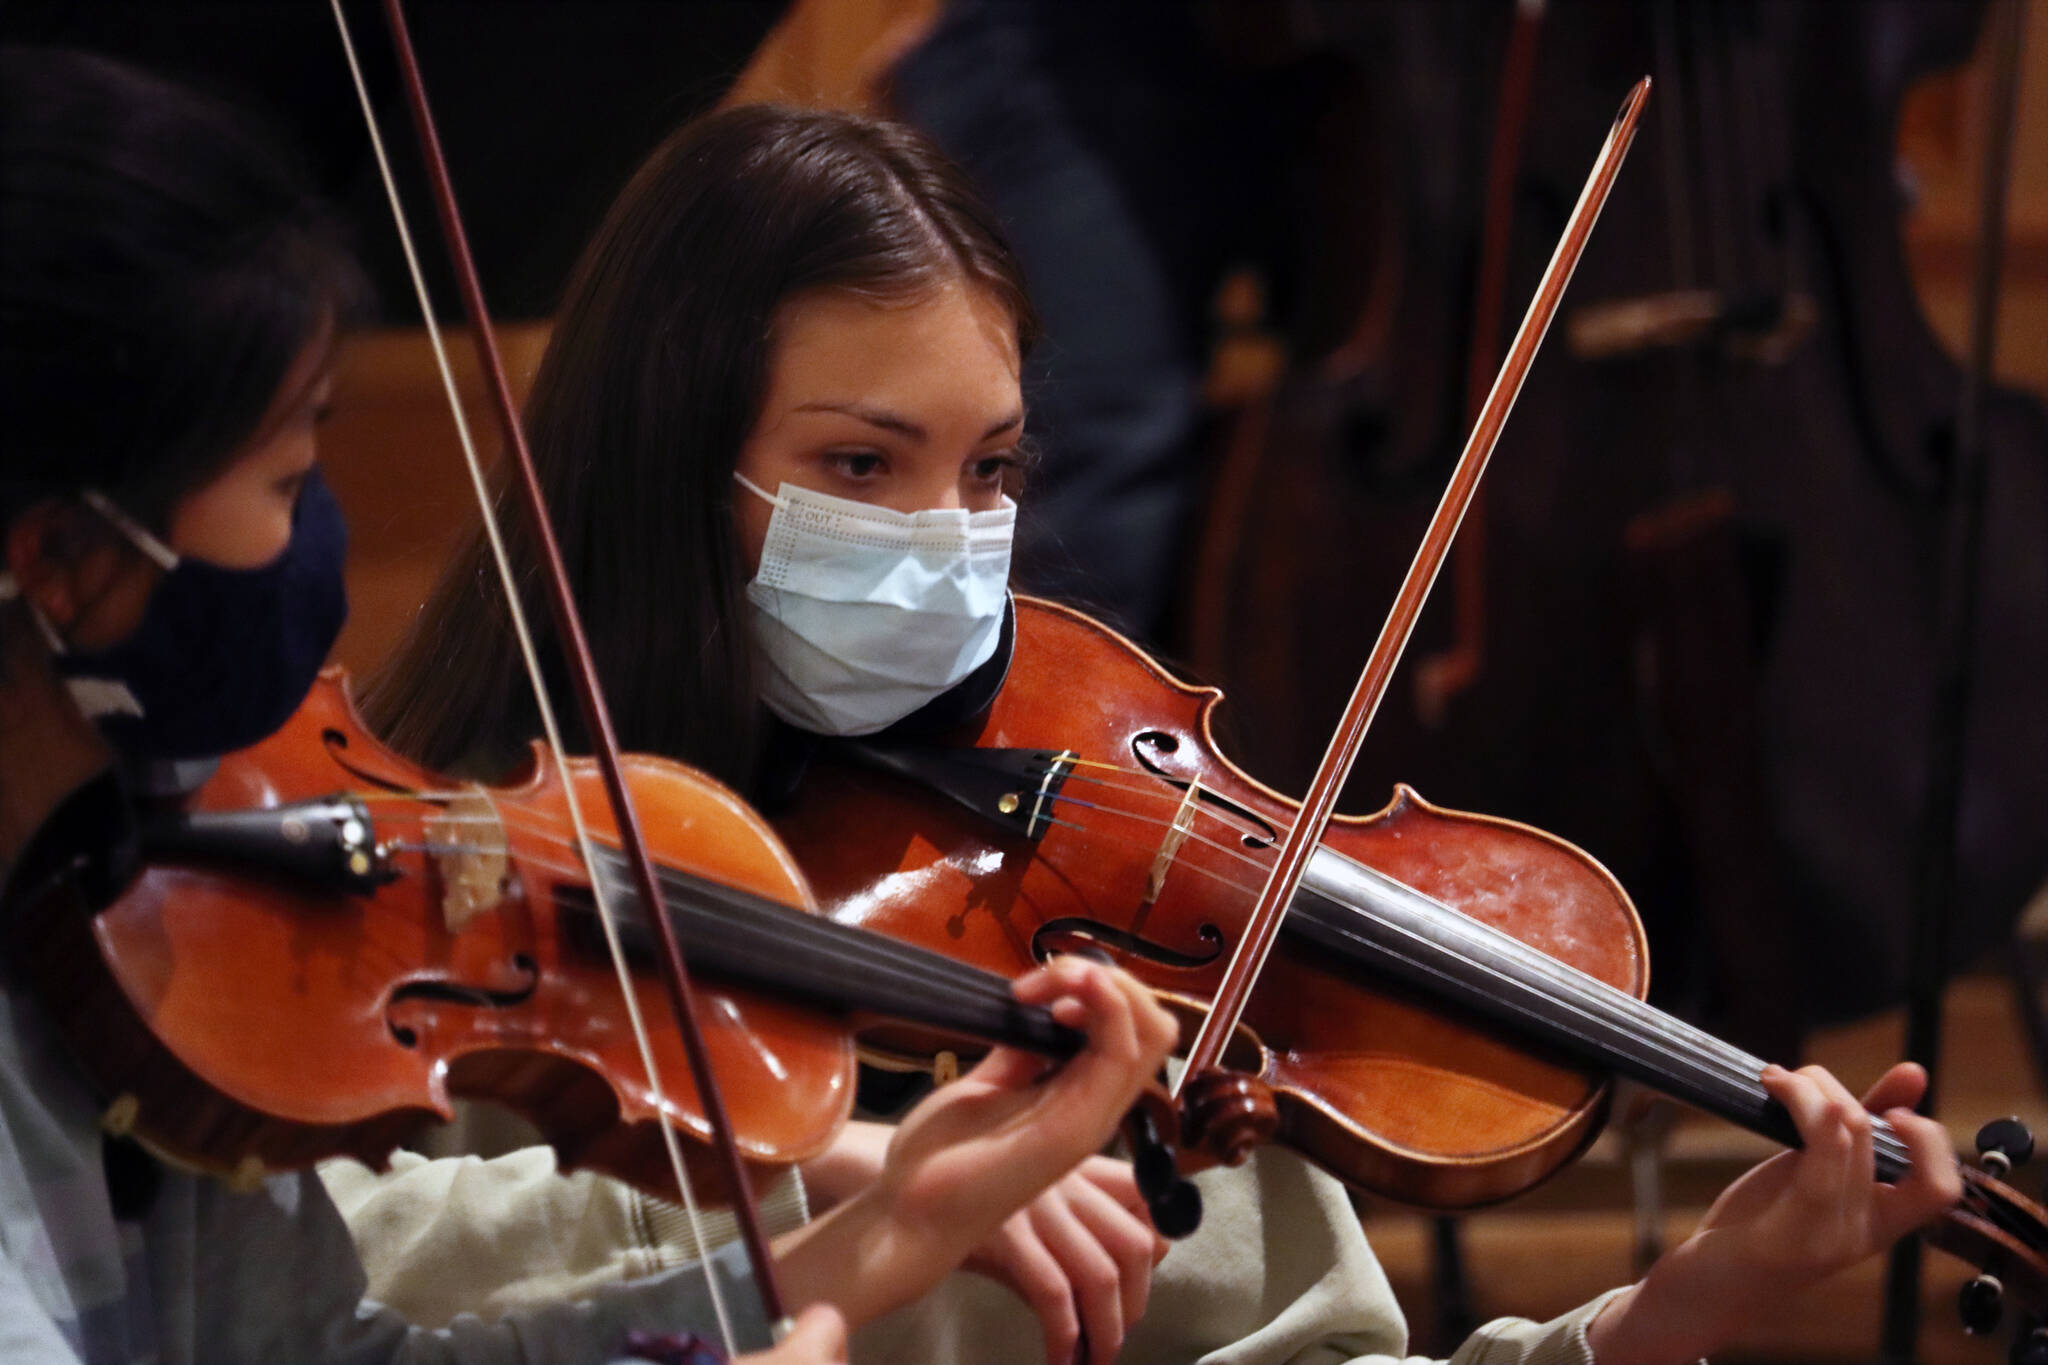 Angela Haffer (right) and Jin Yue Trousil play violin during rehearsal for the Juneau Symphony’s upcoming performance. (Ben Hohenstatt / Juneau Empire)